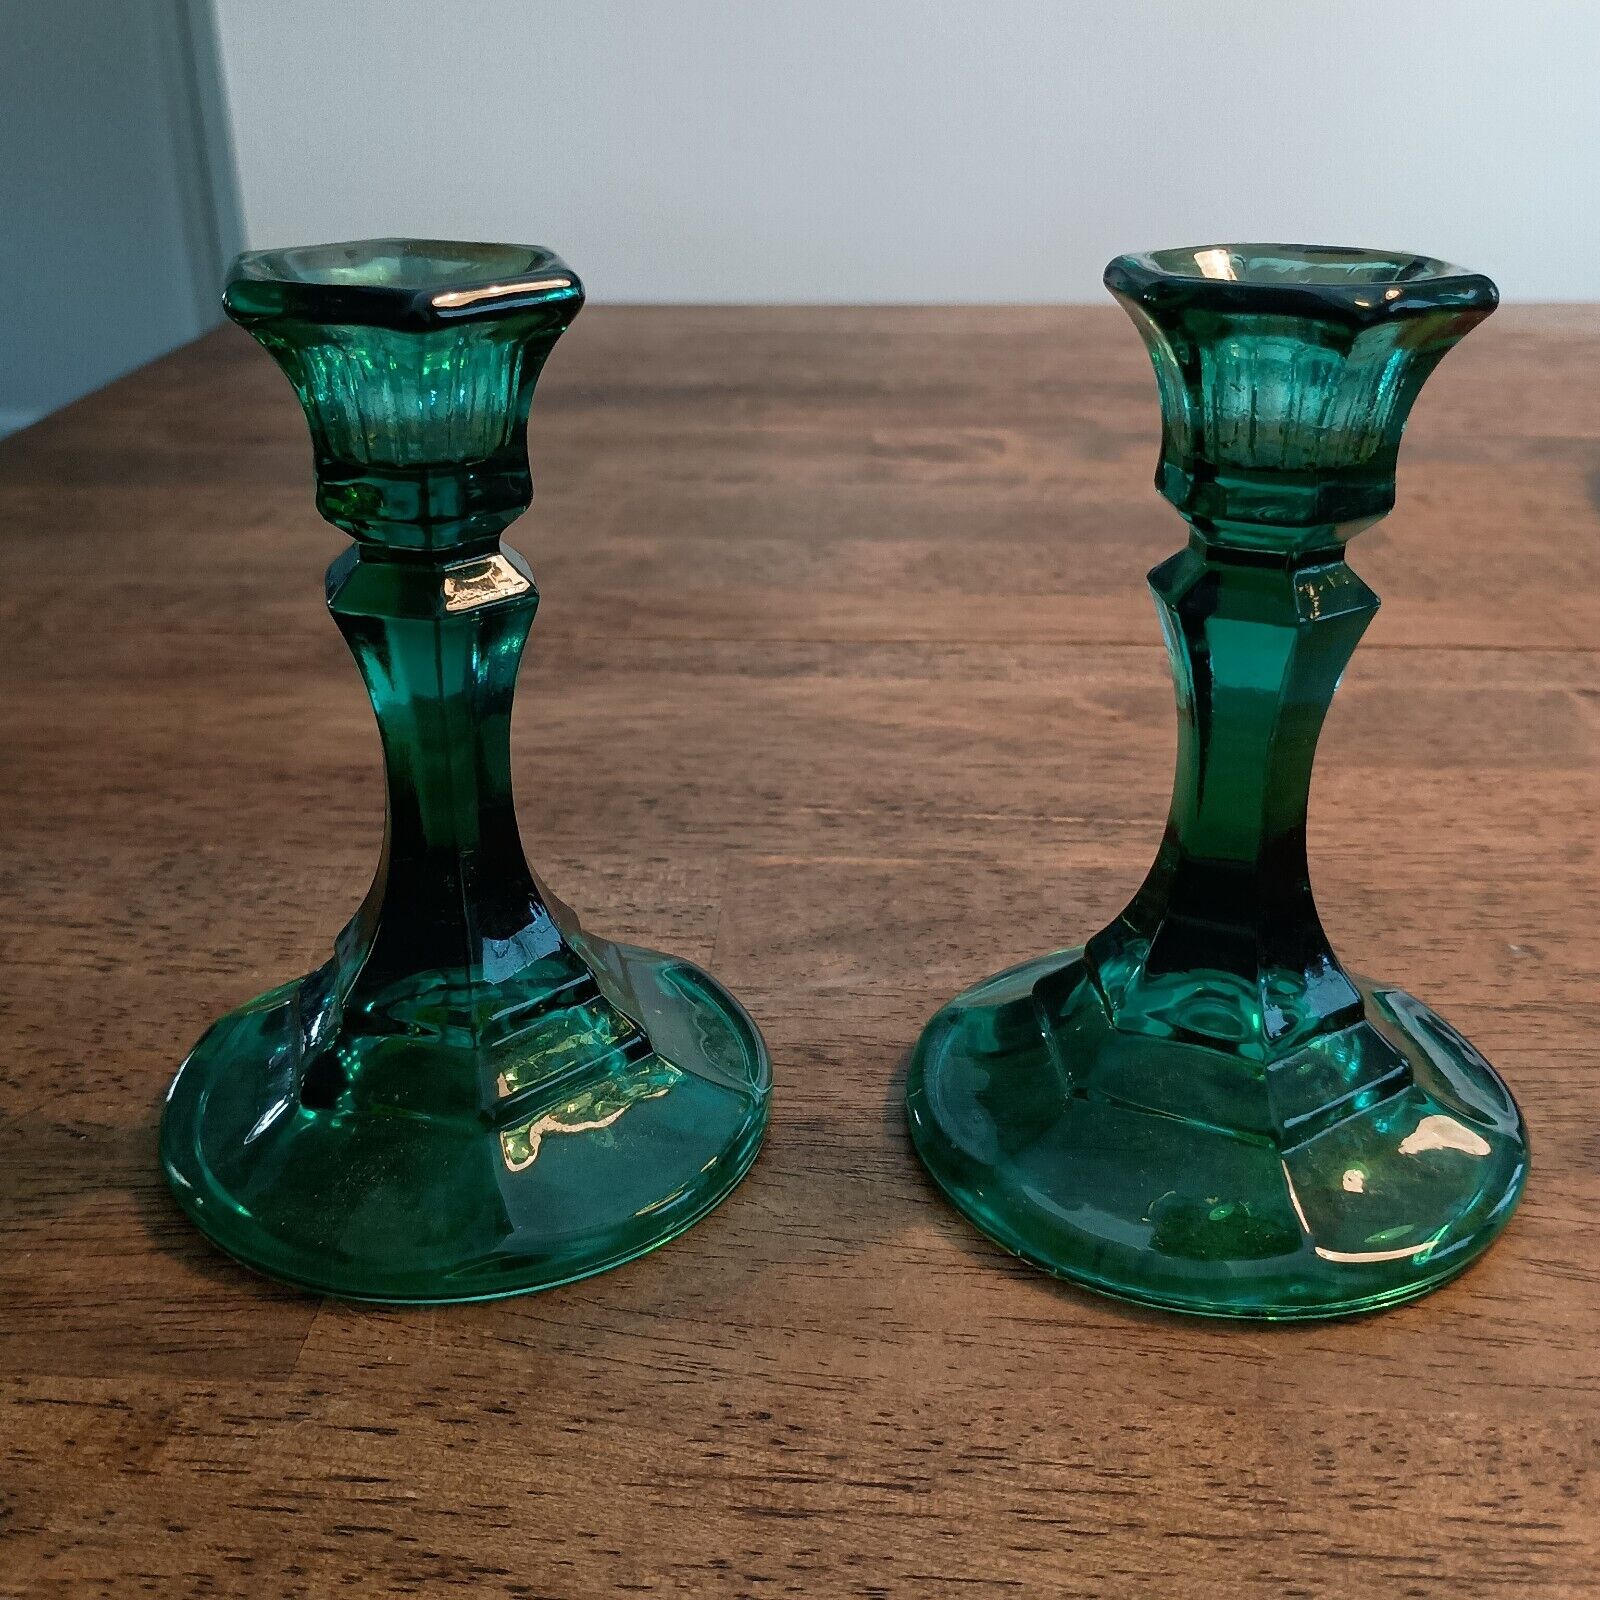 Set of 2 Vintage Indiana Glass Teal Green Candlestick Holders 4.5 in.